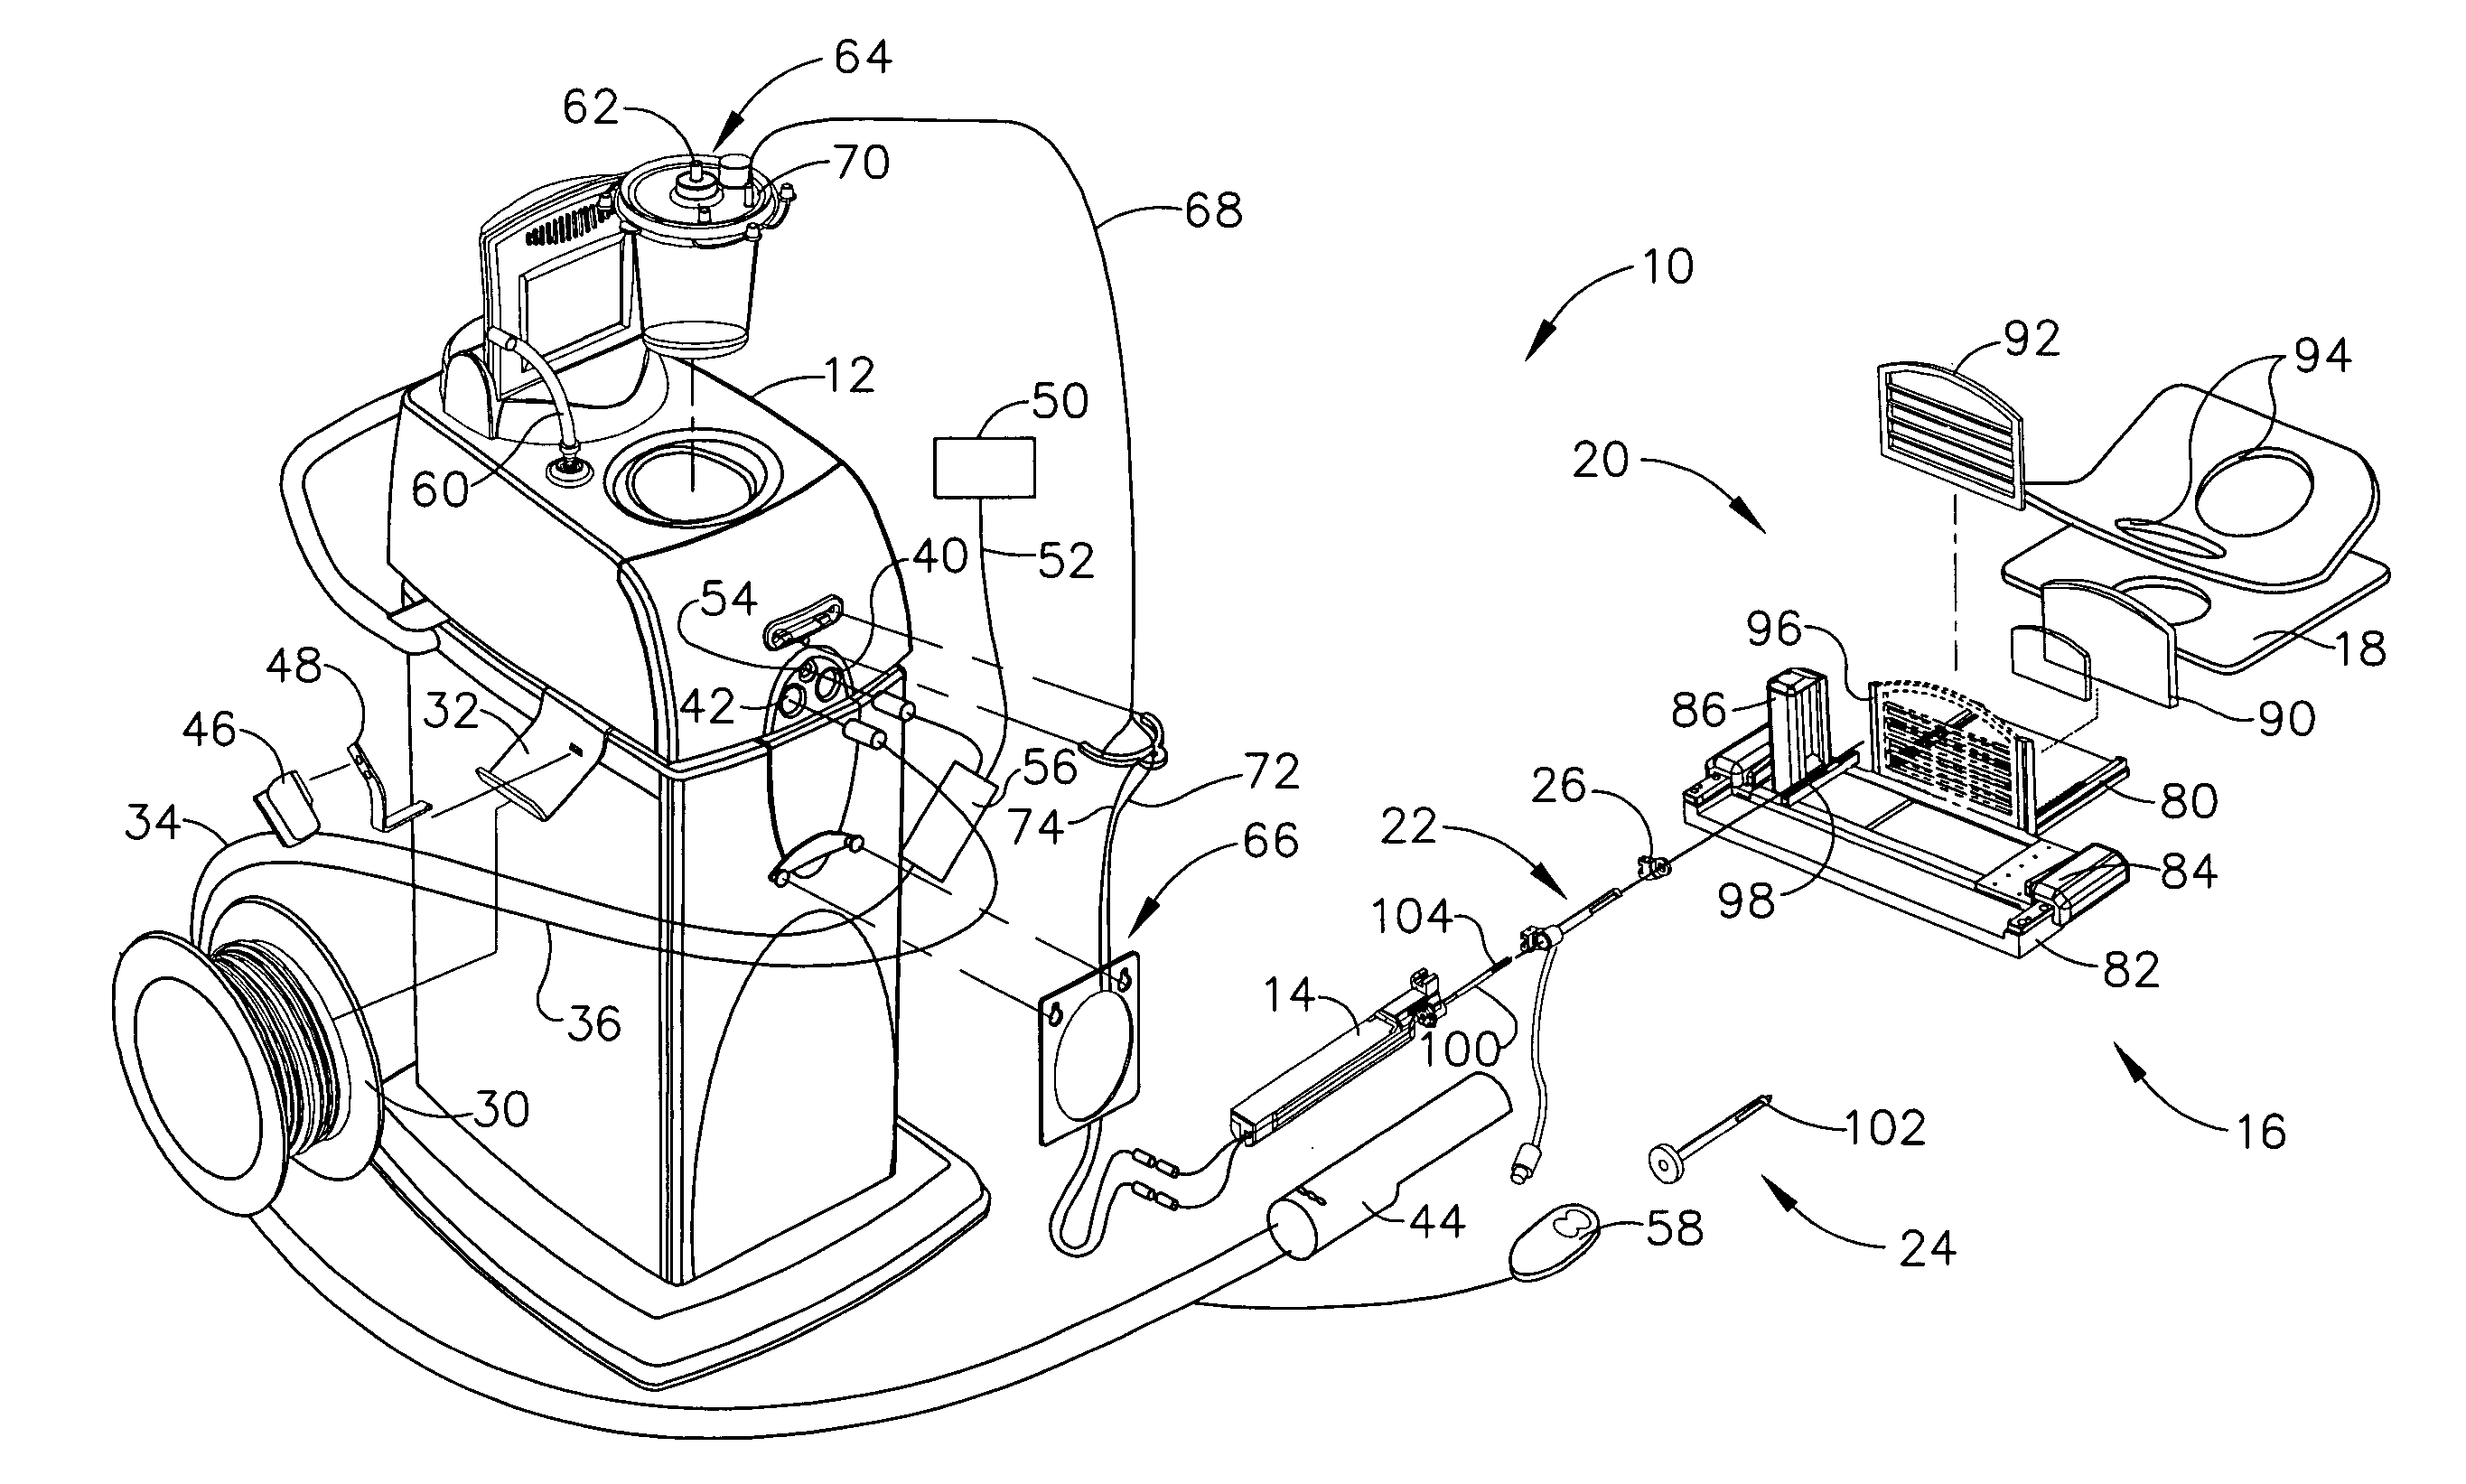 Mri biopsy apparatus incorporating a sleeve and multi-function obturator